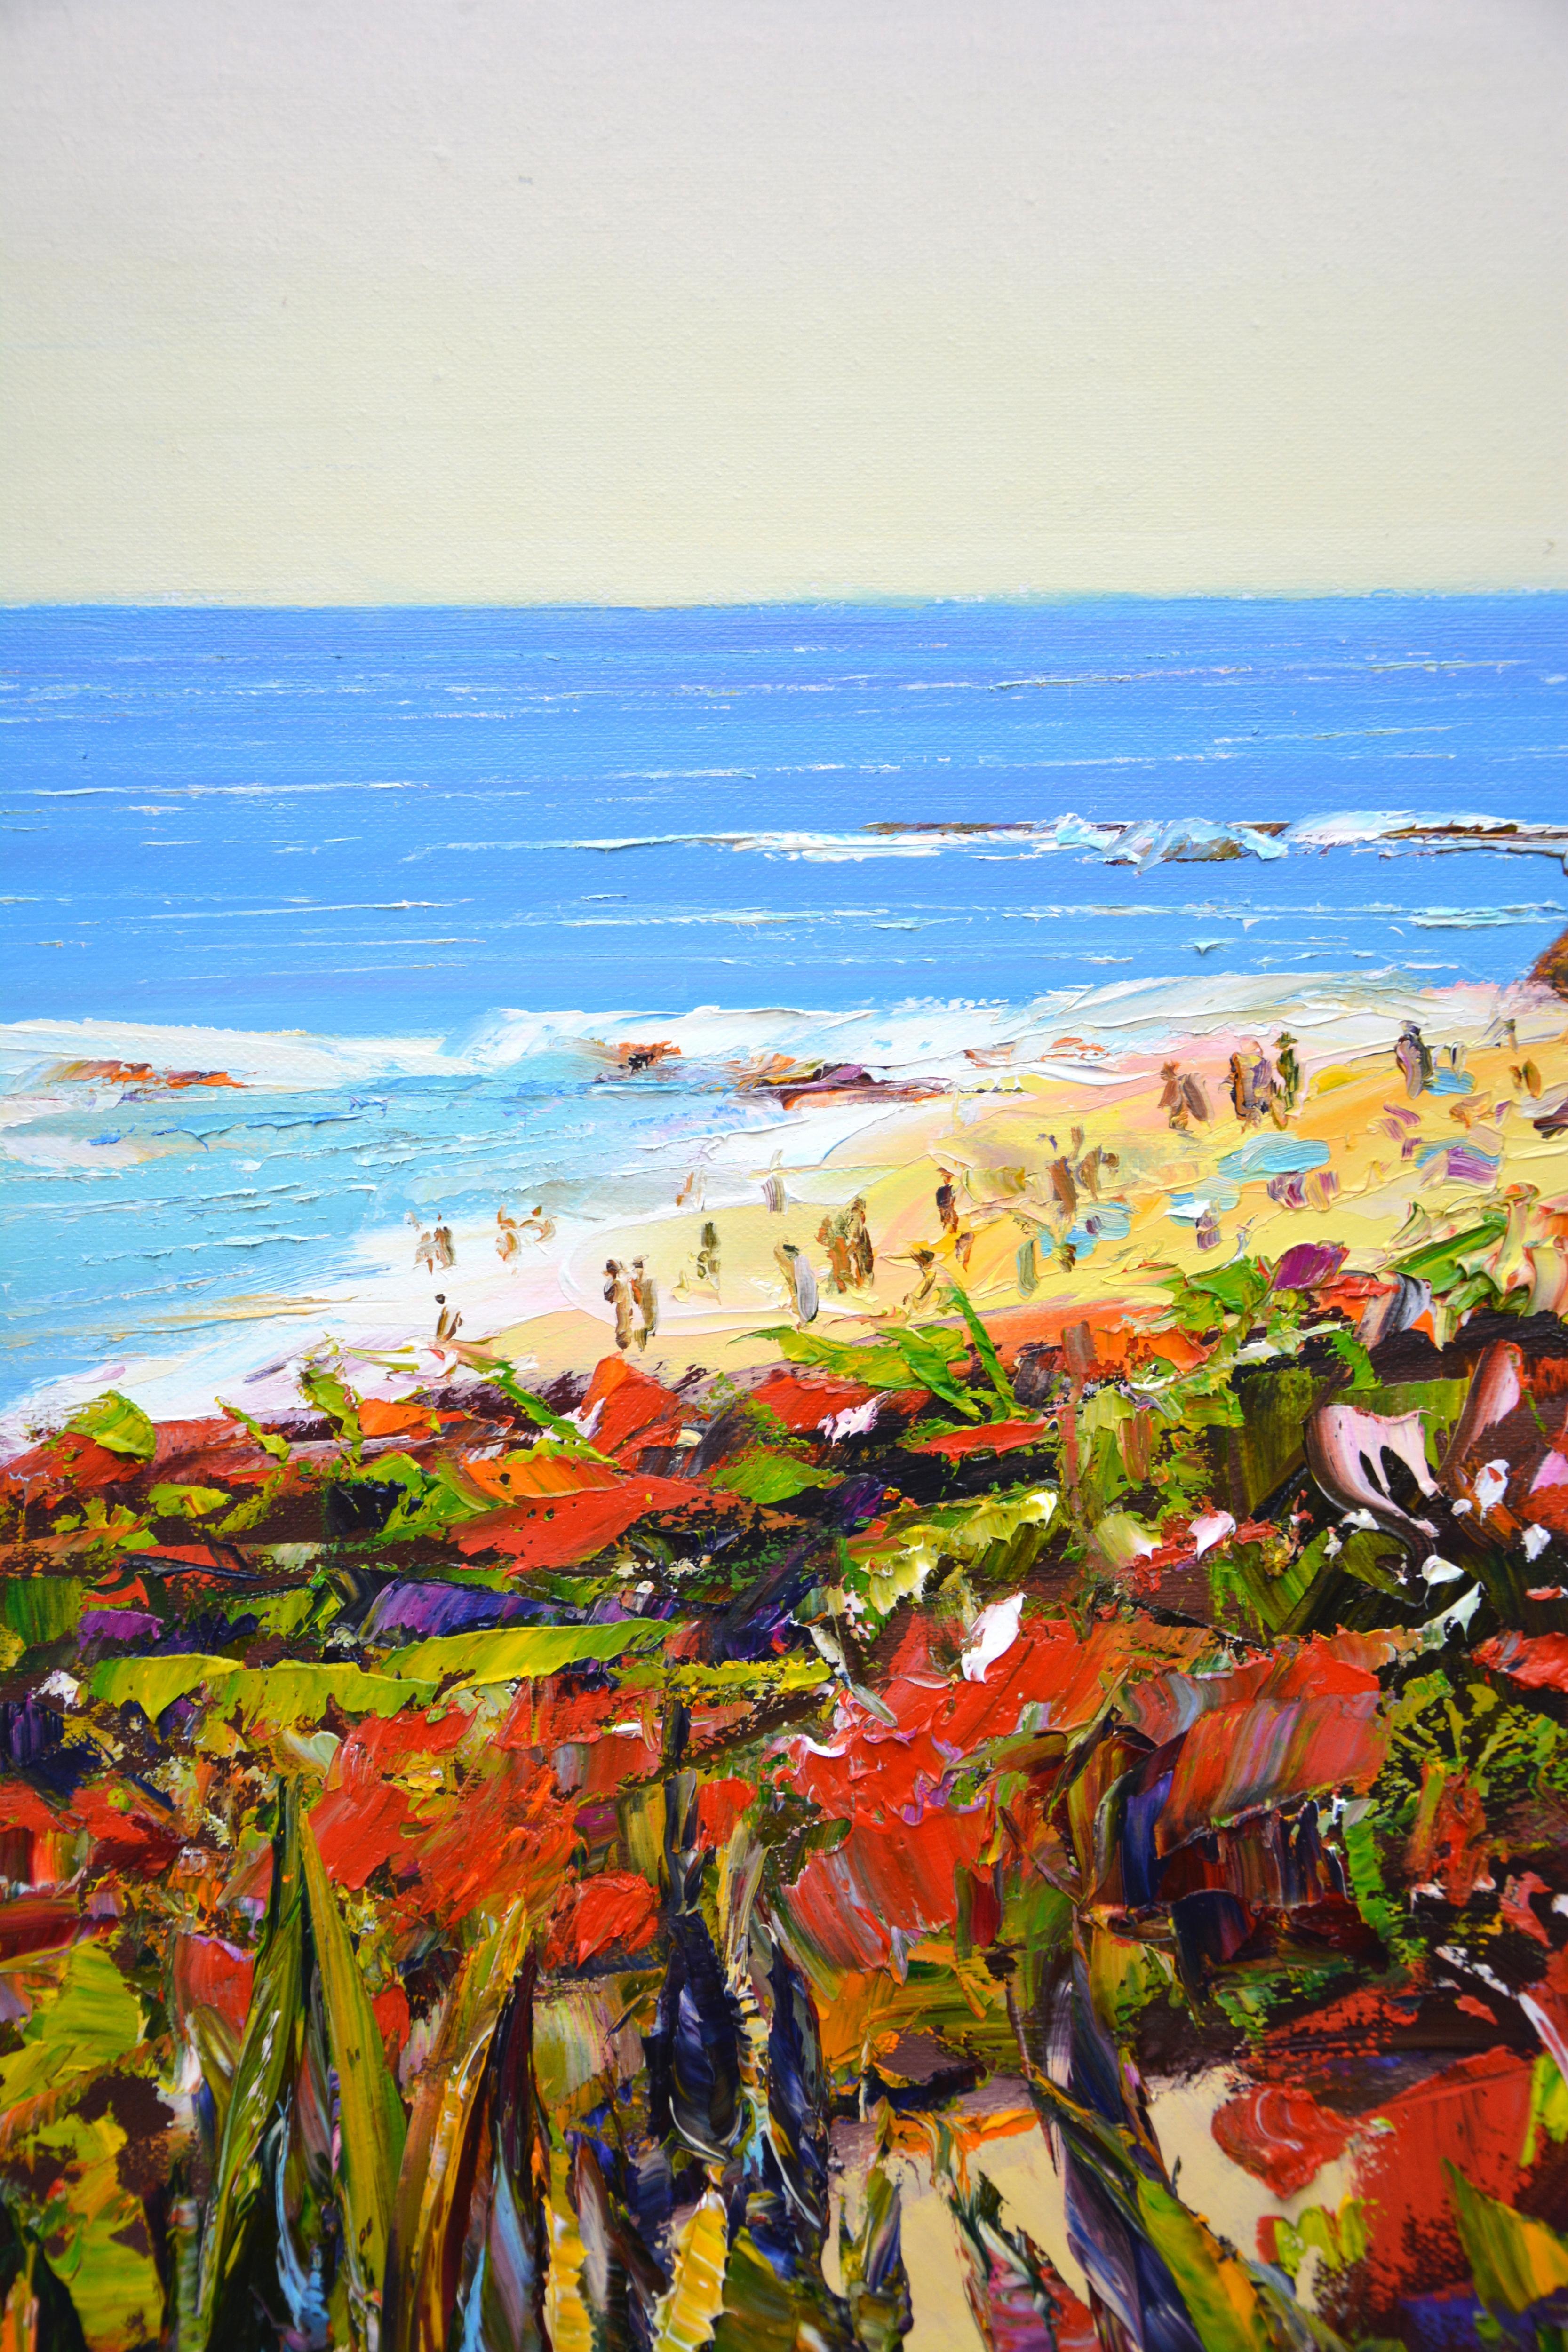 Laguna Beach. California. America's summer landscape: blue ocean, waves, sunny beach, palm trees, beach, people on the shore, red flowers, road, romance, impressionism, realism, sky, California coast create an atmosphere of relaxation ... I painted